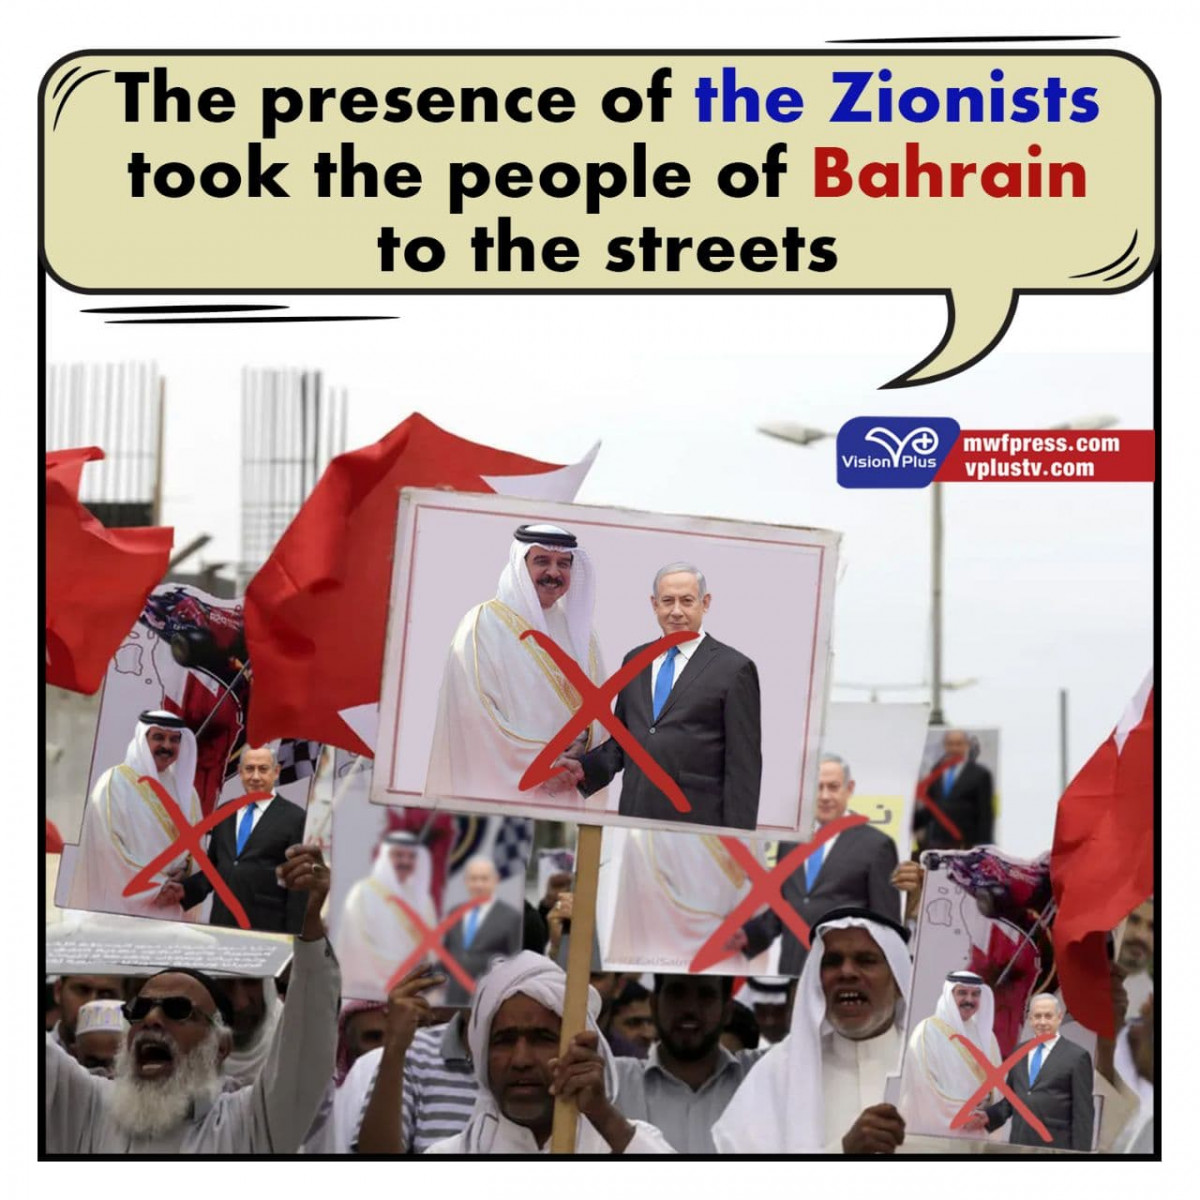 The presence of the Zionists took the people of Bahrain to the streets